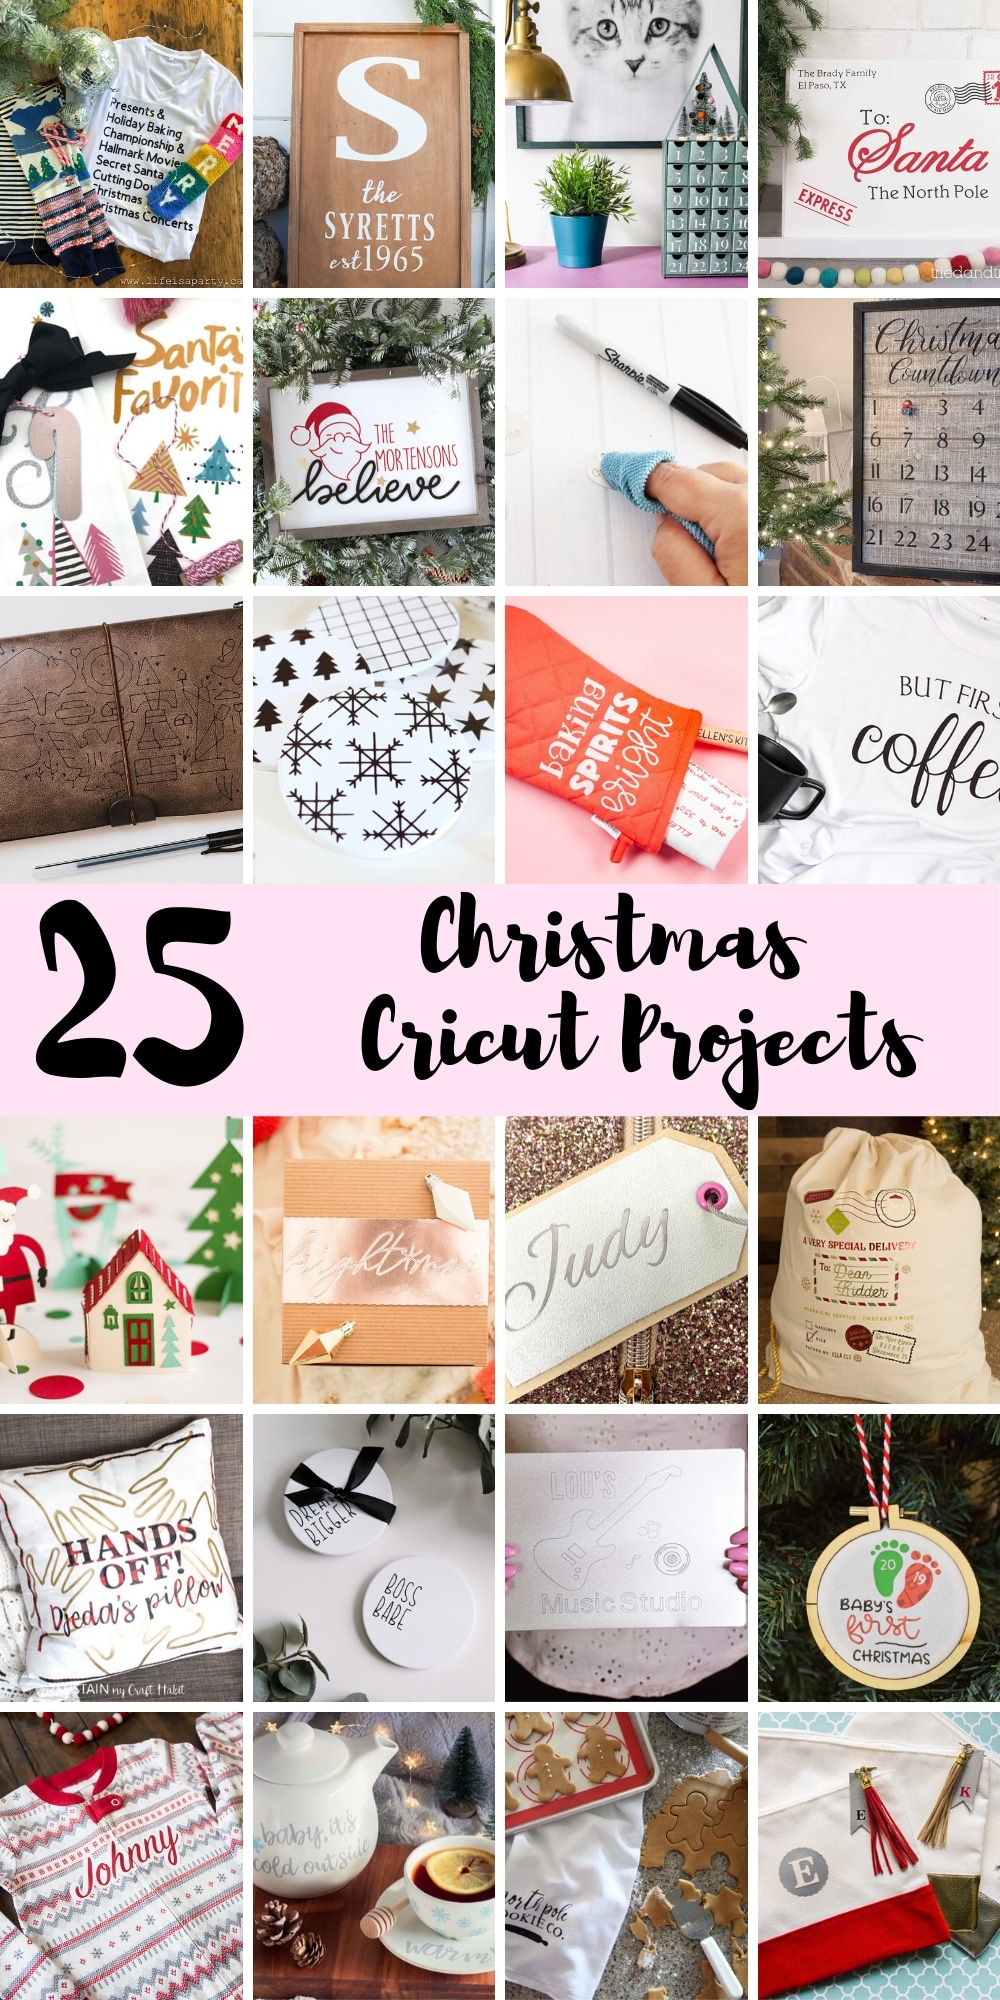 25 Christmas Cricut Projects: inspiration and ideas for all your Christmas crafting with your Cricut machine using paper, fabric, metal, leather, and more.